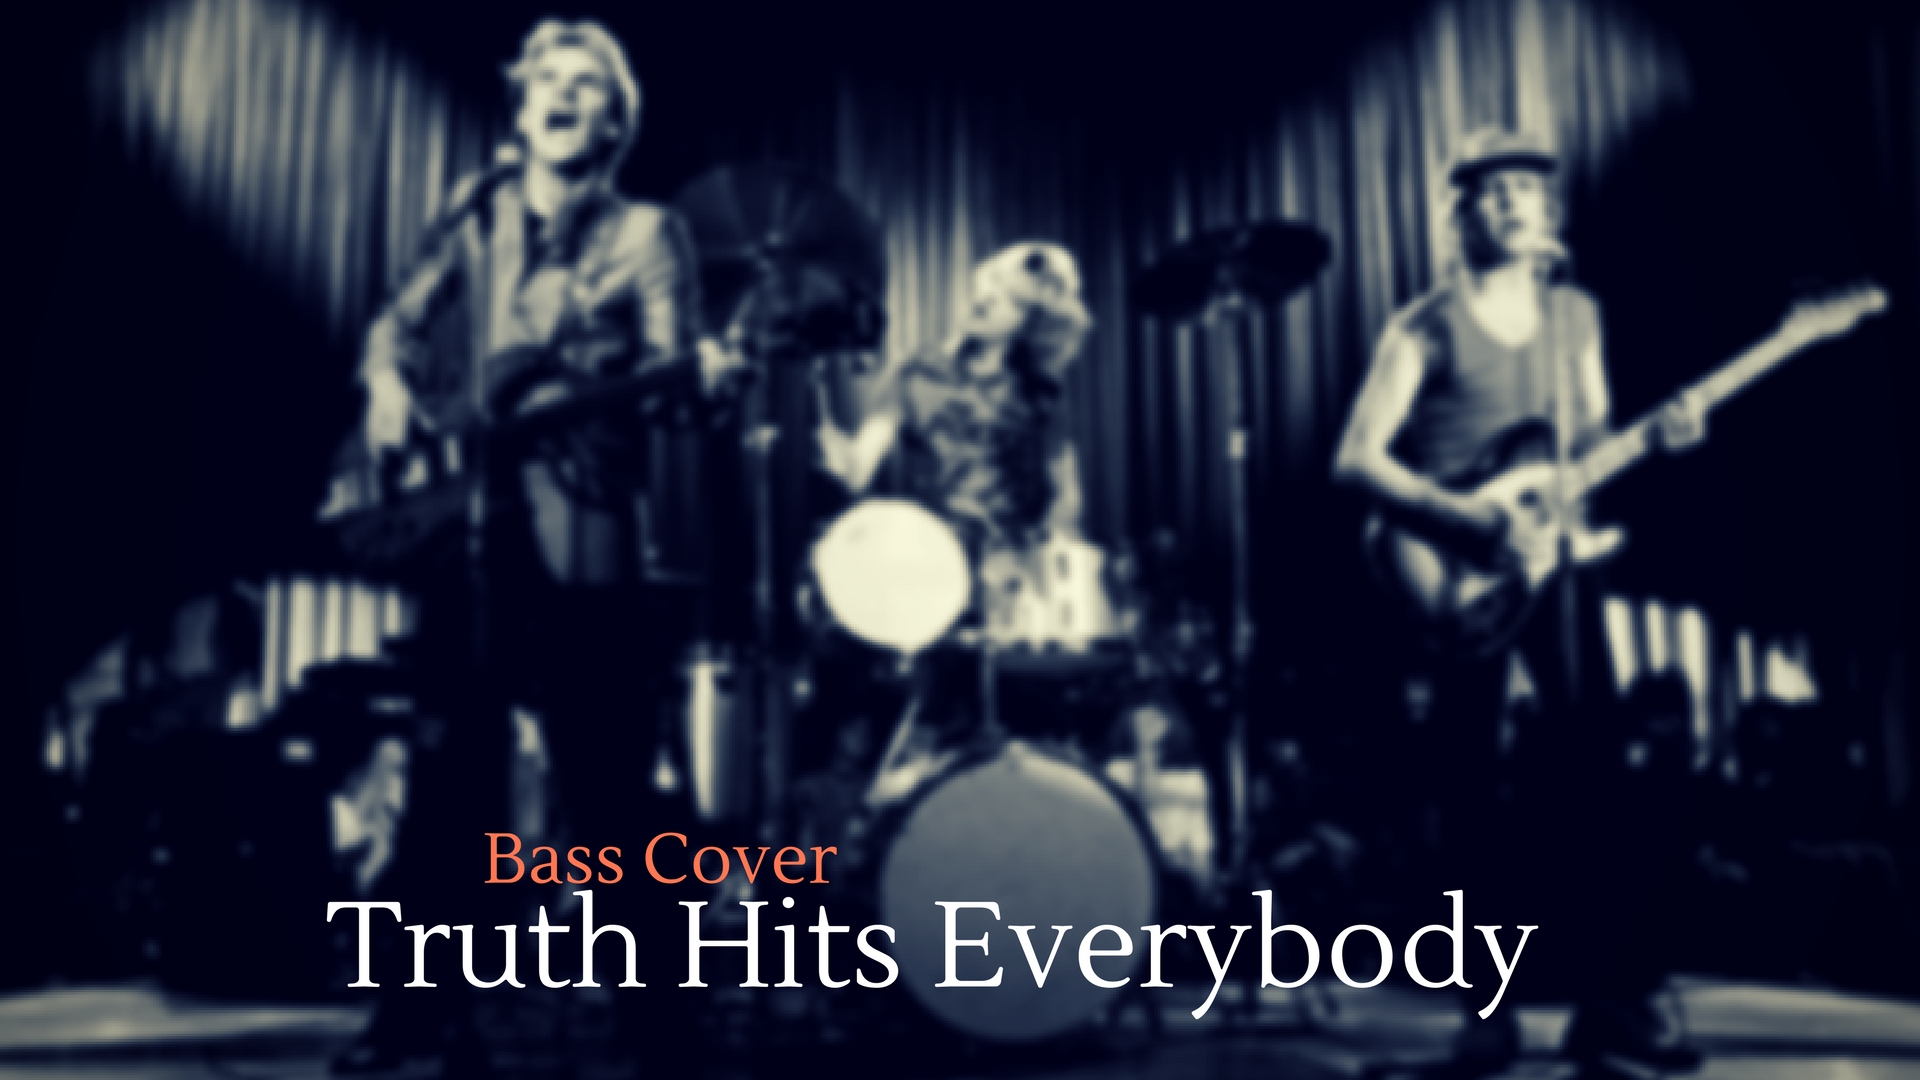 Truth hits everybody bass cover